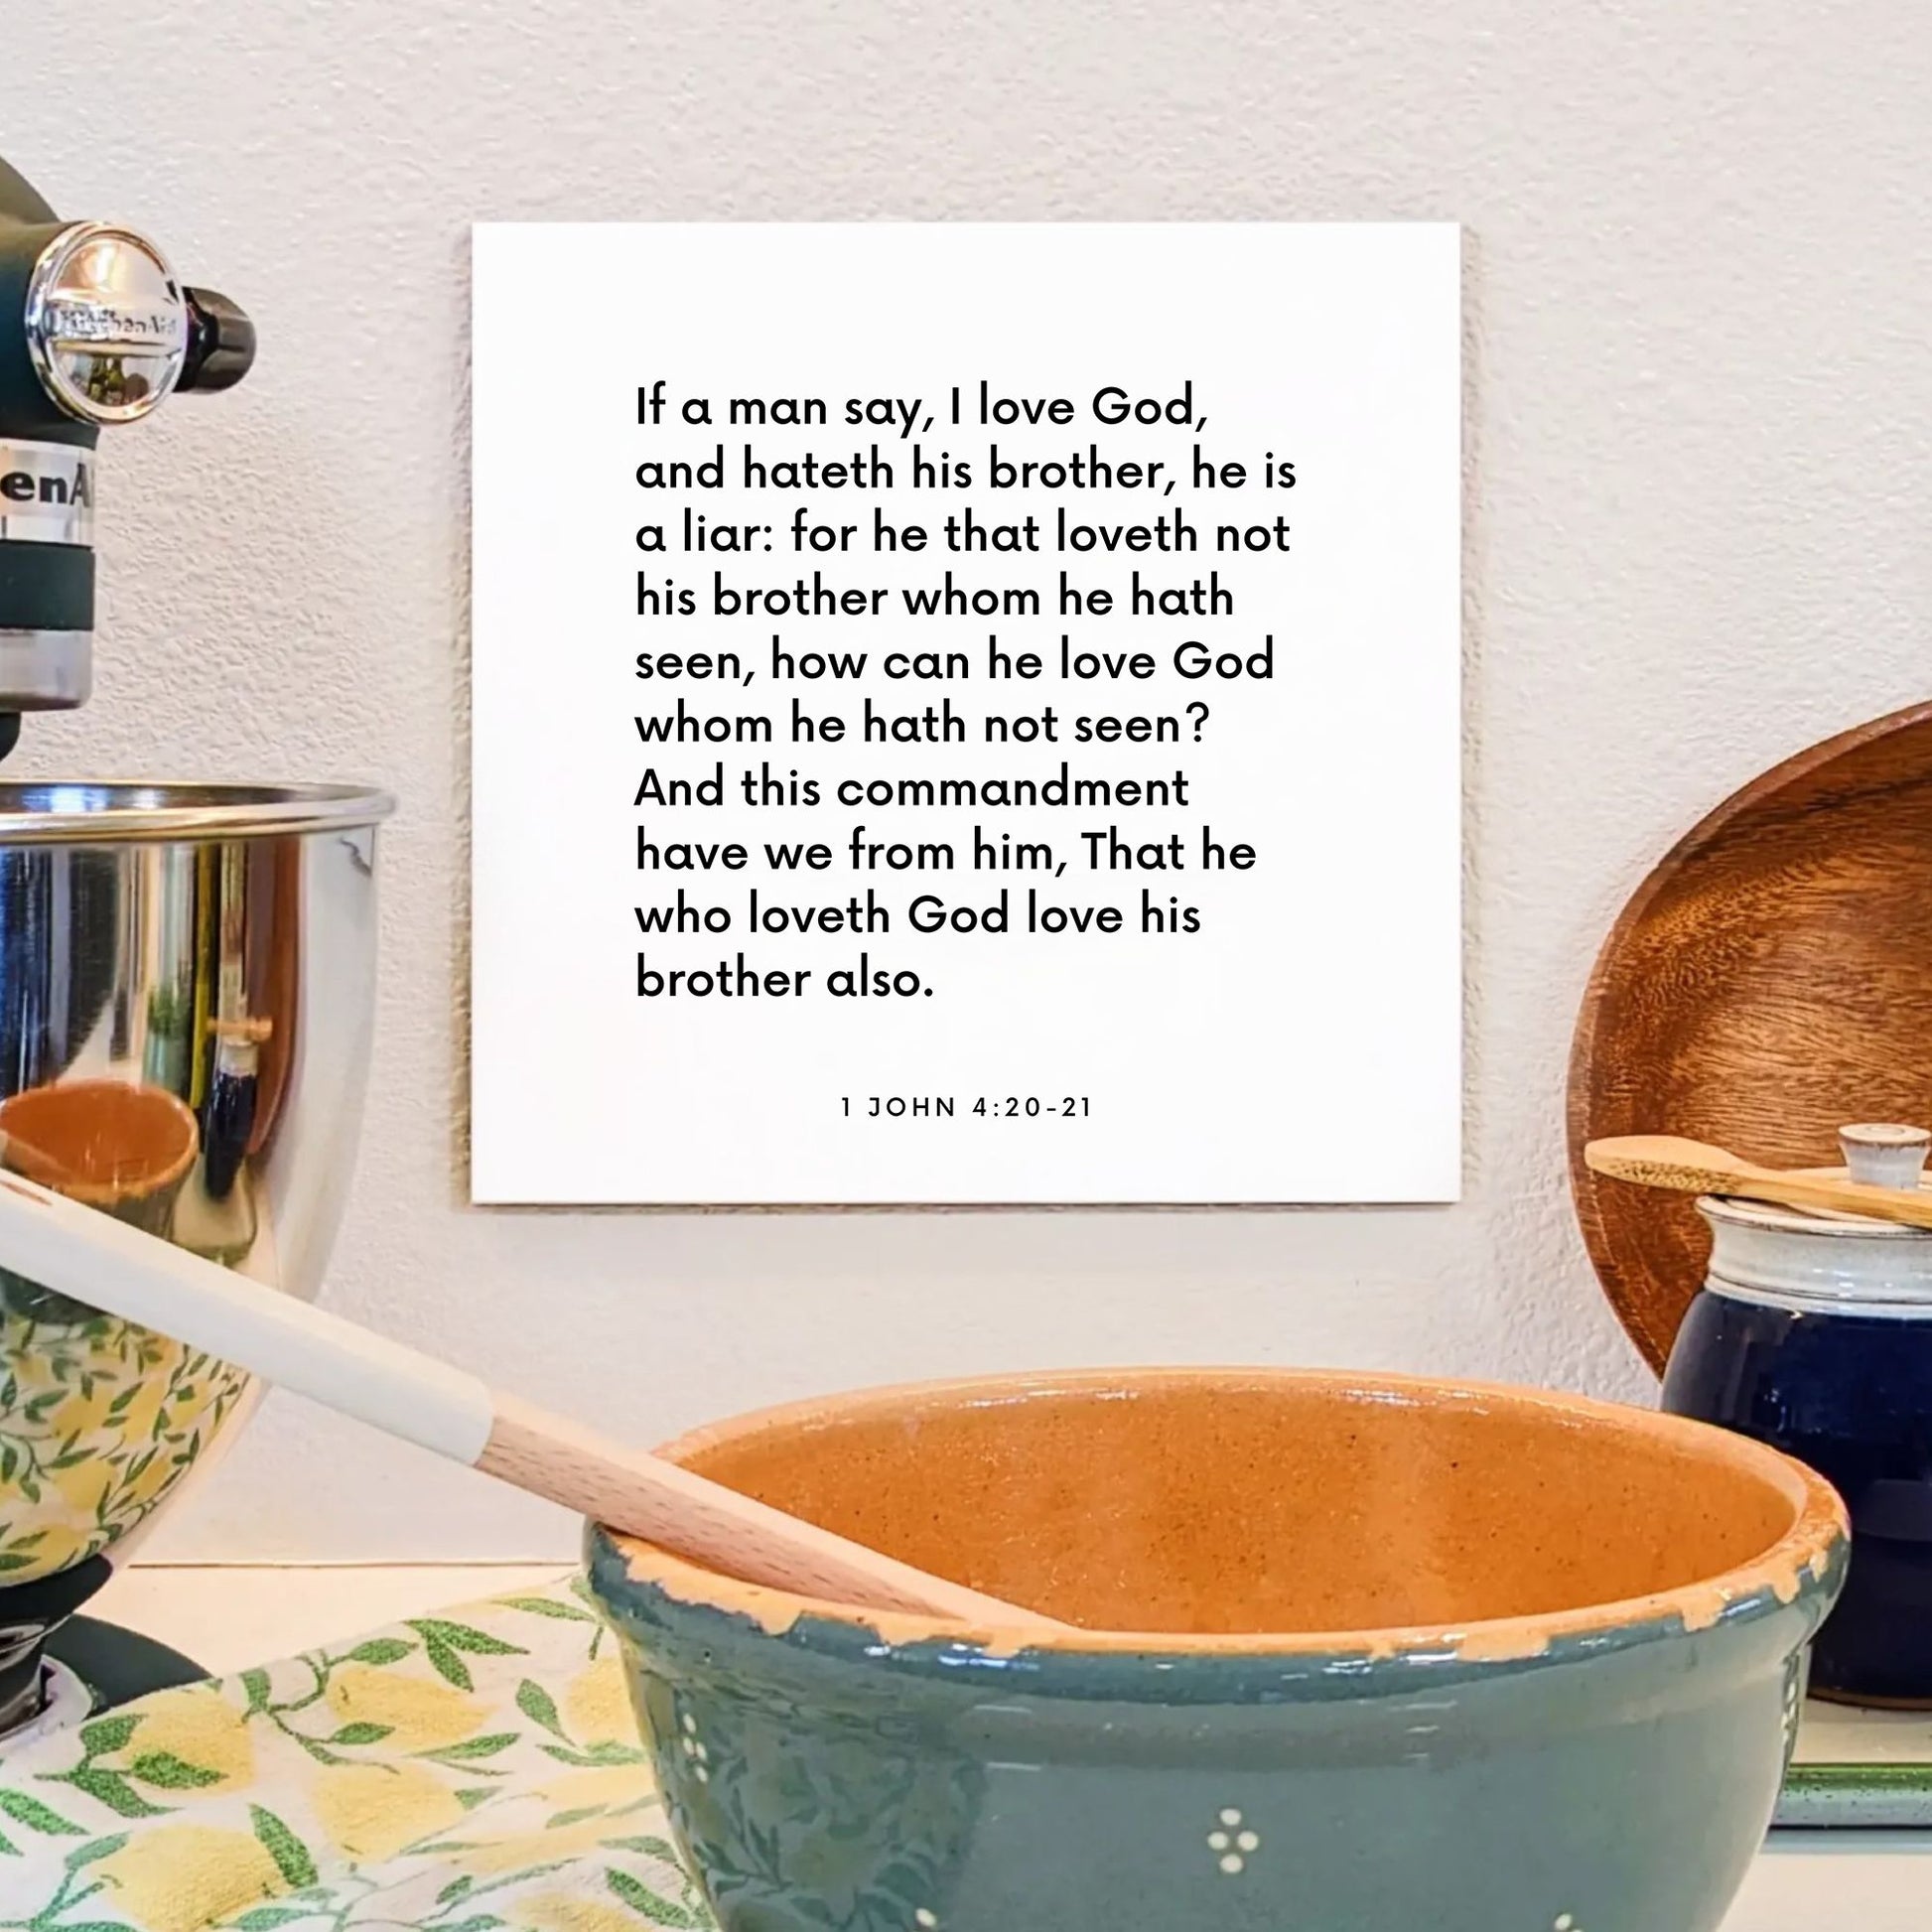 Kitchen mouting of the scripture tile for 1 John 4:20-21 - "He who loveth God love his brother also"